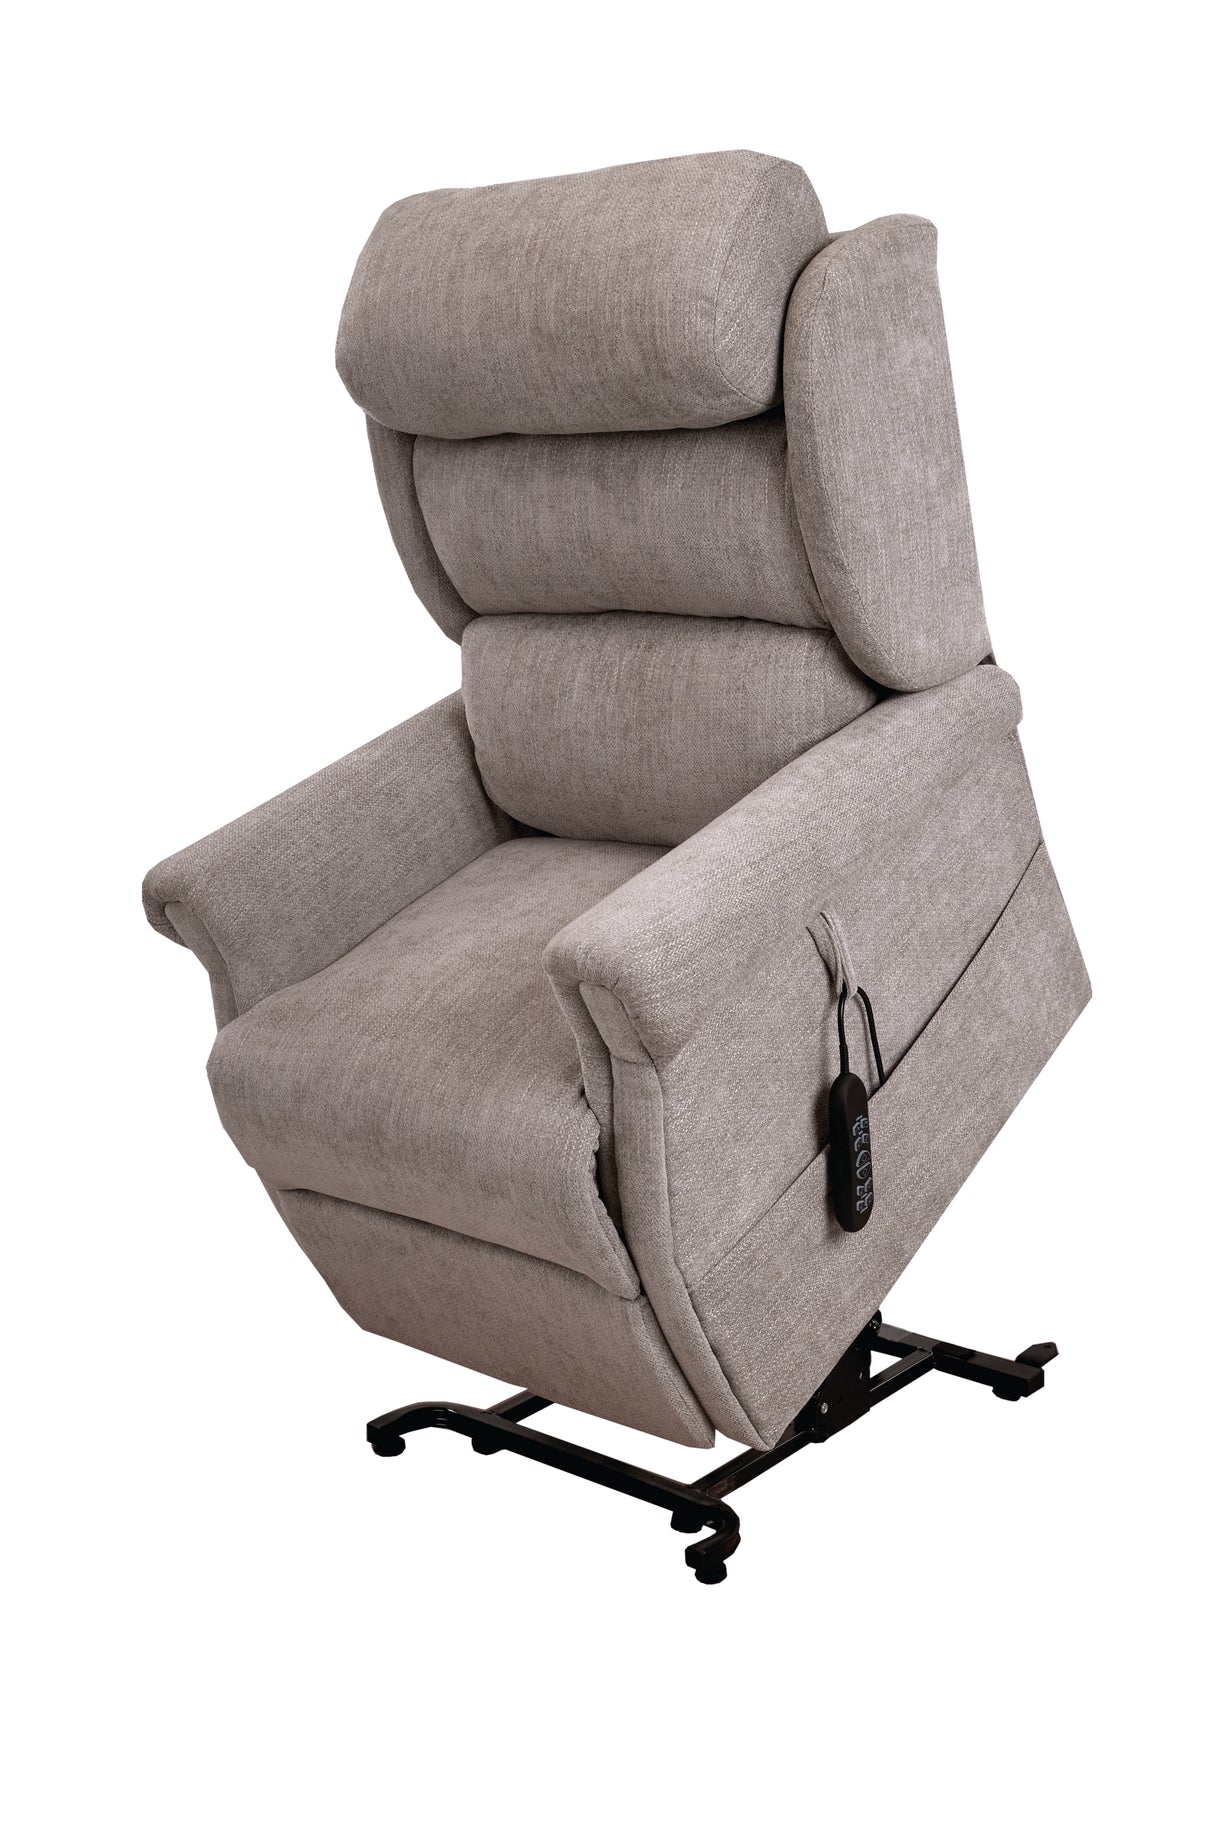 Quantcock rise and recline chair slate